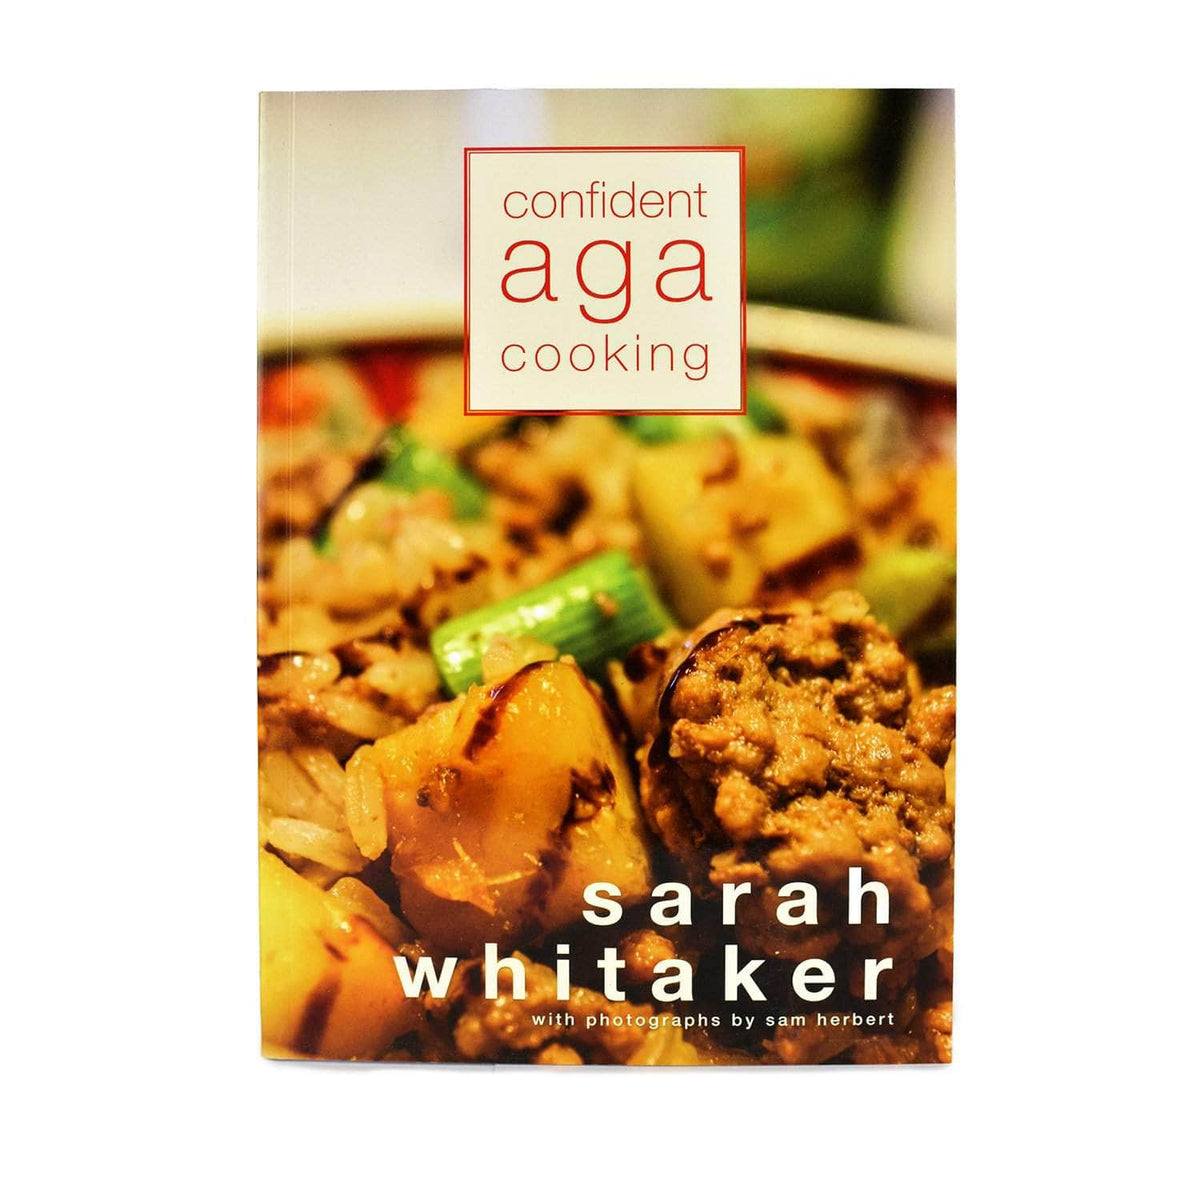 &#39;Confident Aga cooking&#39; - cookbook by Sarah Whitaker